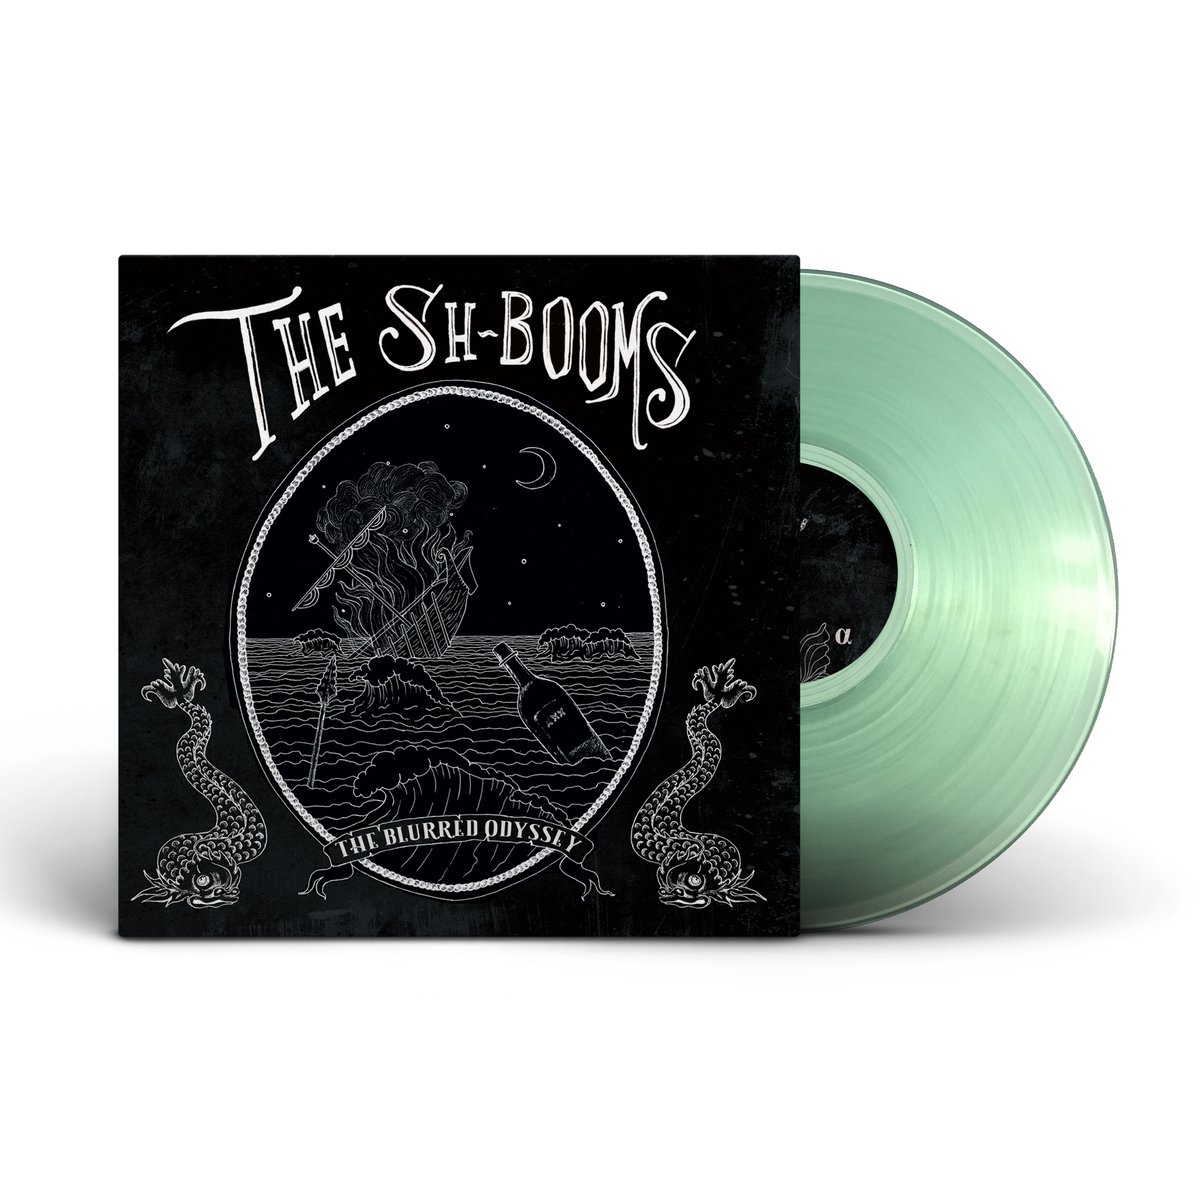 Image of The Sh-Booms 'The Blurred Odyssey' Vinyl LP